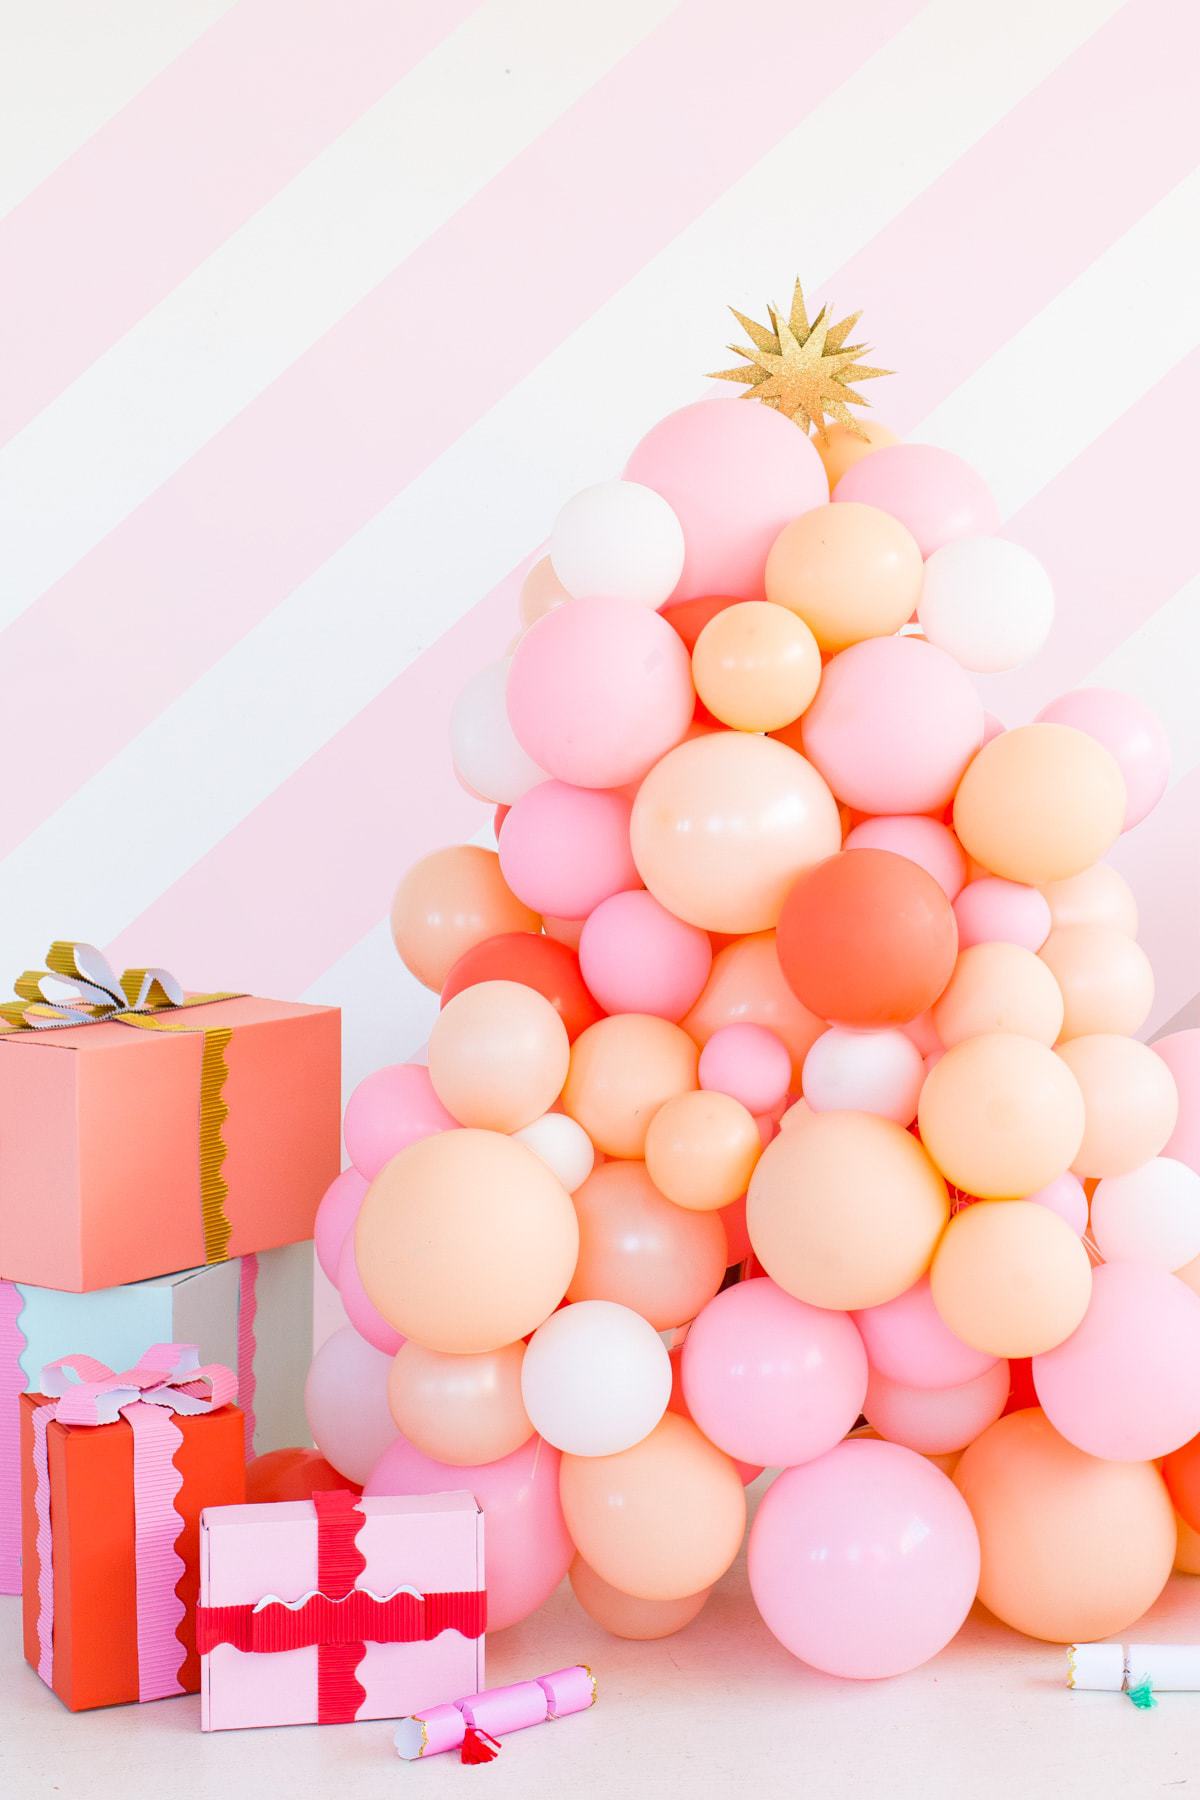 11 Whimsical Christmas Tree Alternatives To Try This Season